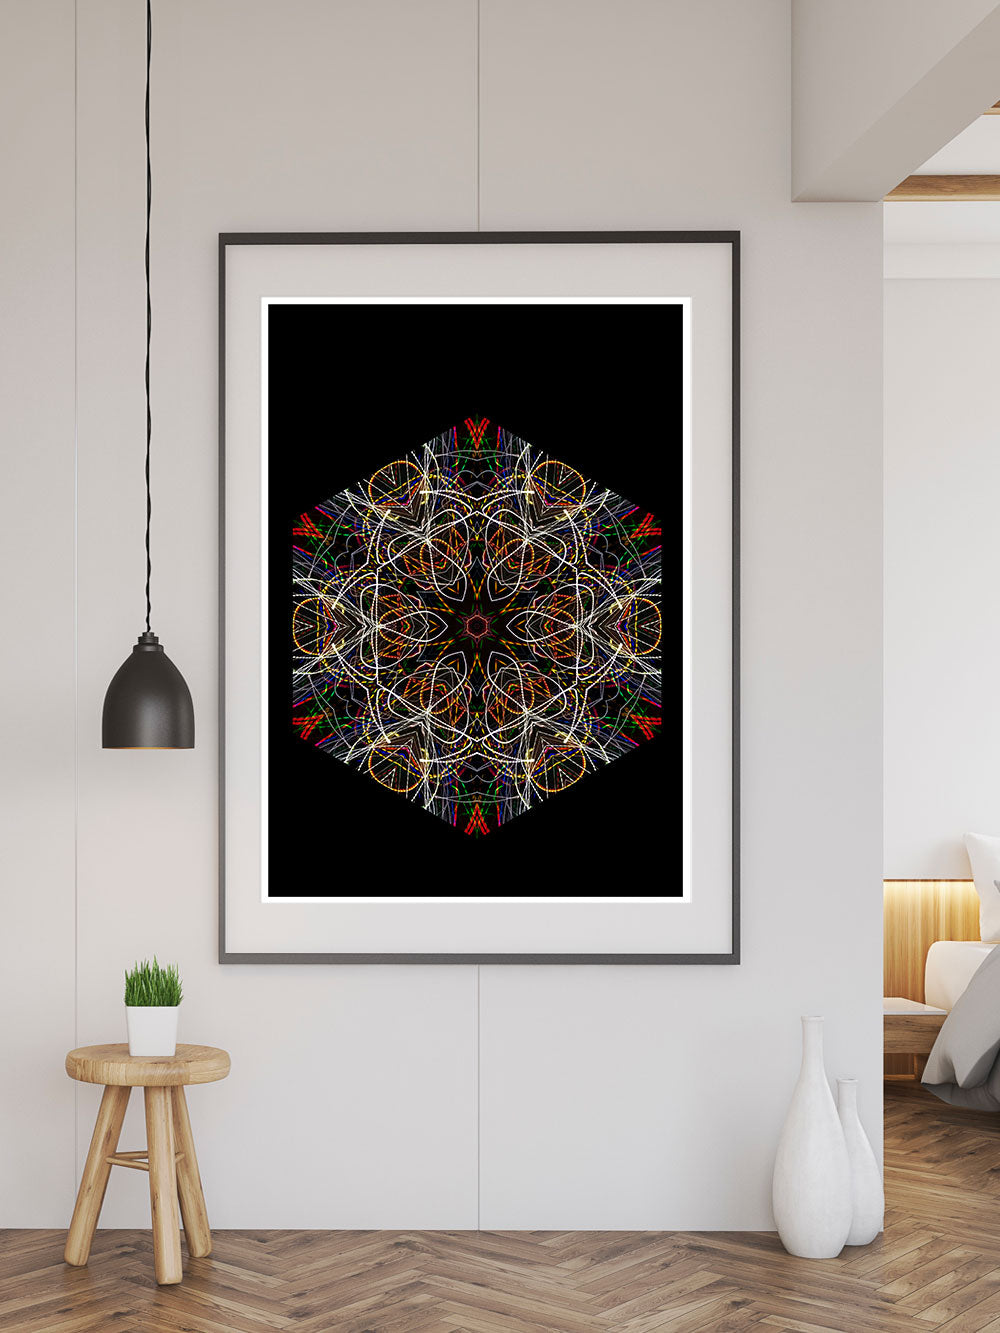 Fahrenheit 451 Pattern Print in a frame on a wall